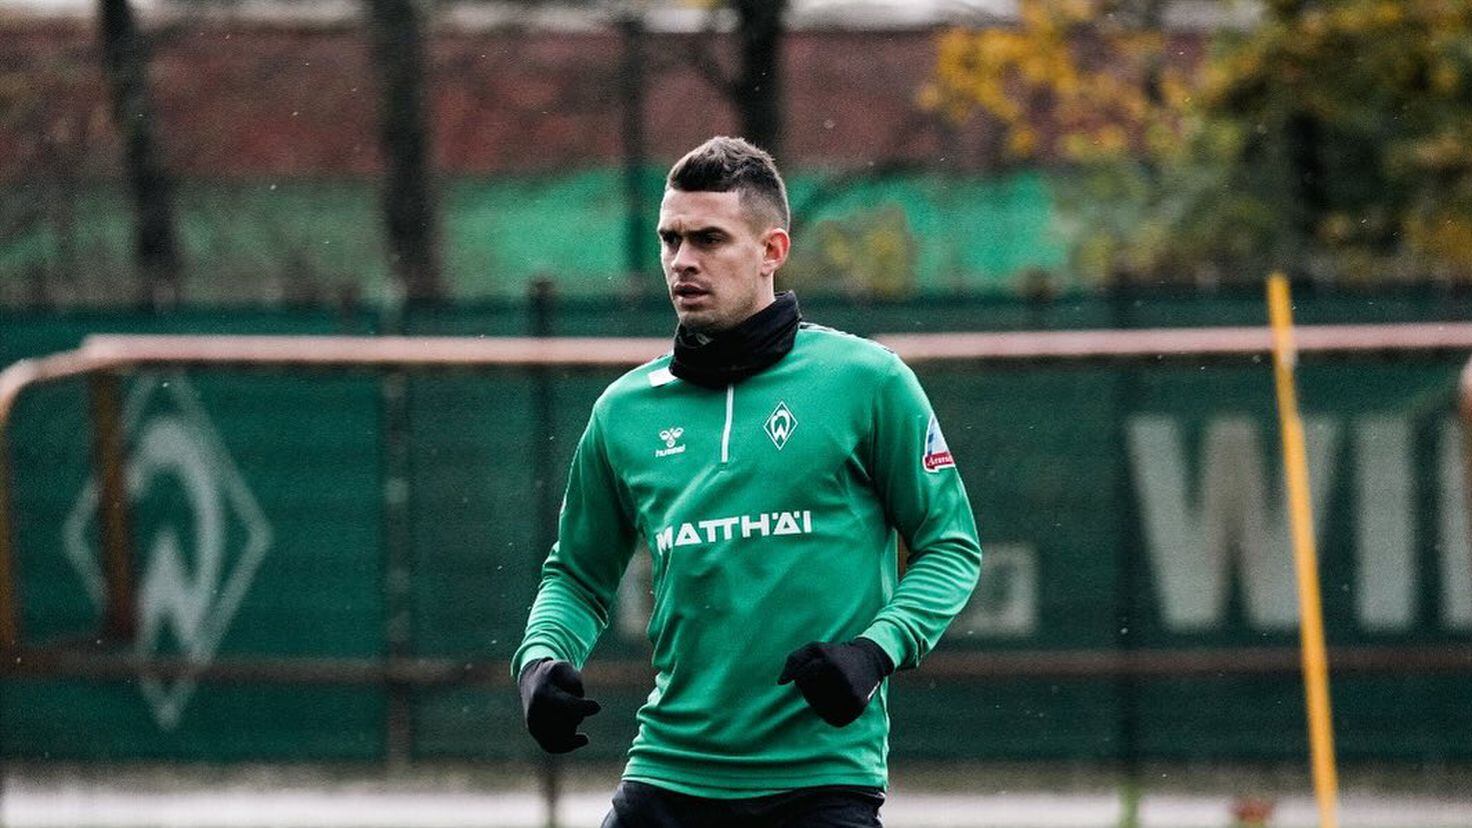 Werder Bremen confirms its contract with Burri: “We do not want to let Rafa leave”